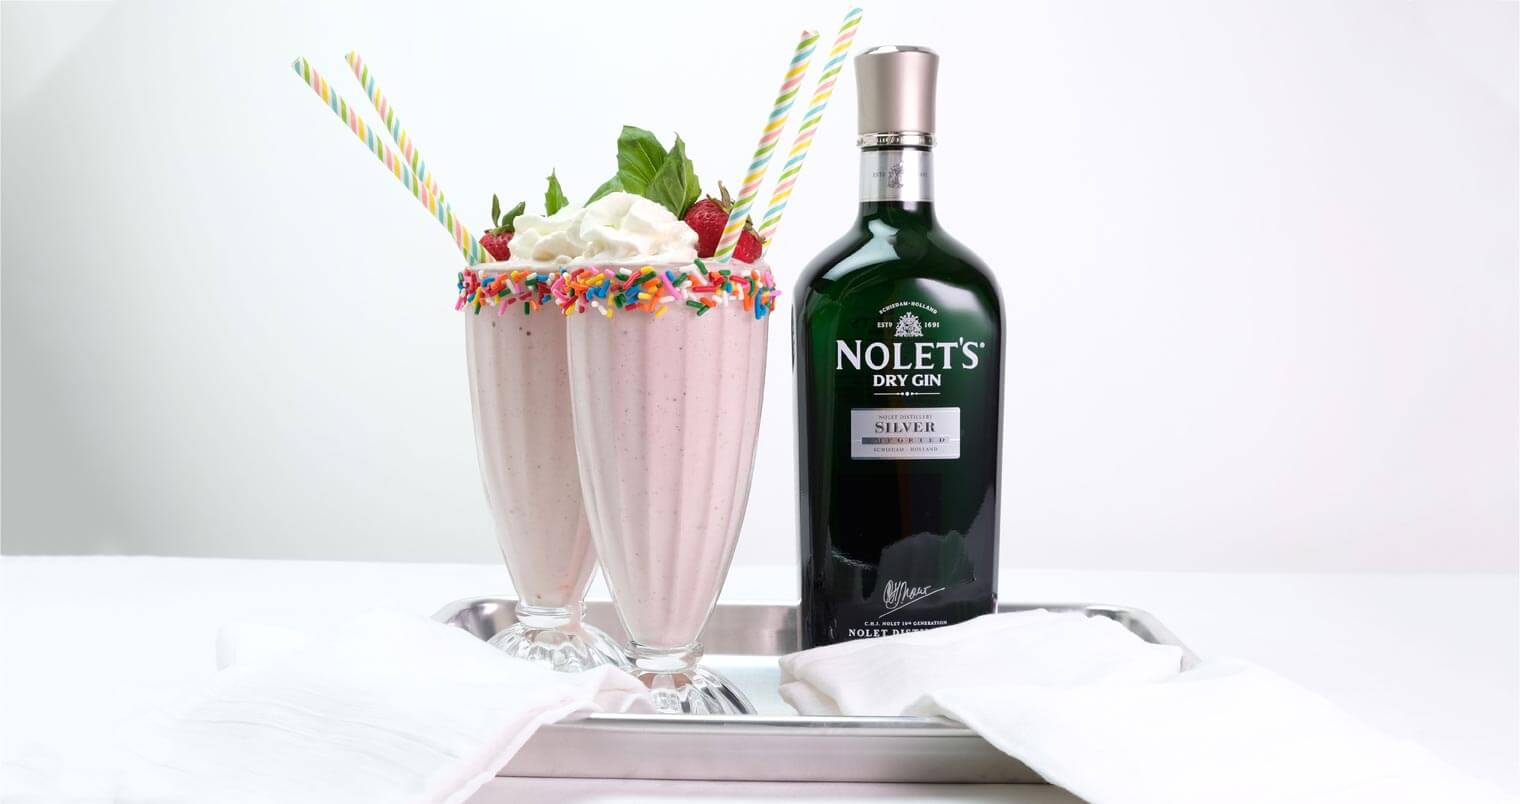 NOLET’S Spiked Strawberry Milkshake, cockails, bottle on silver tray, featured image